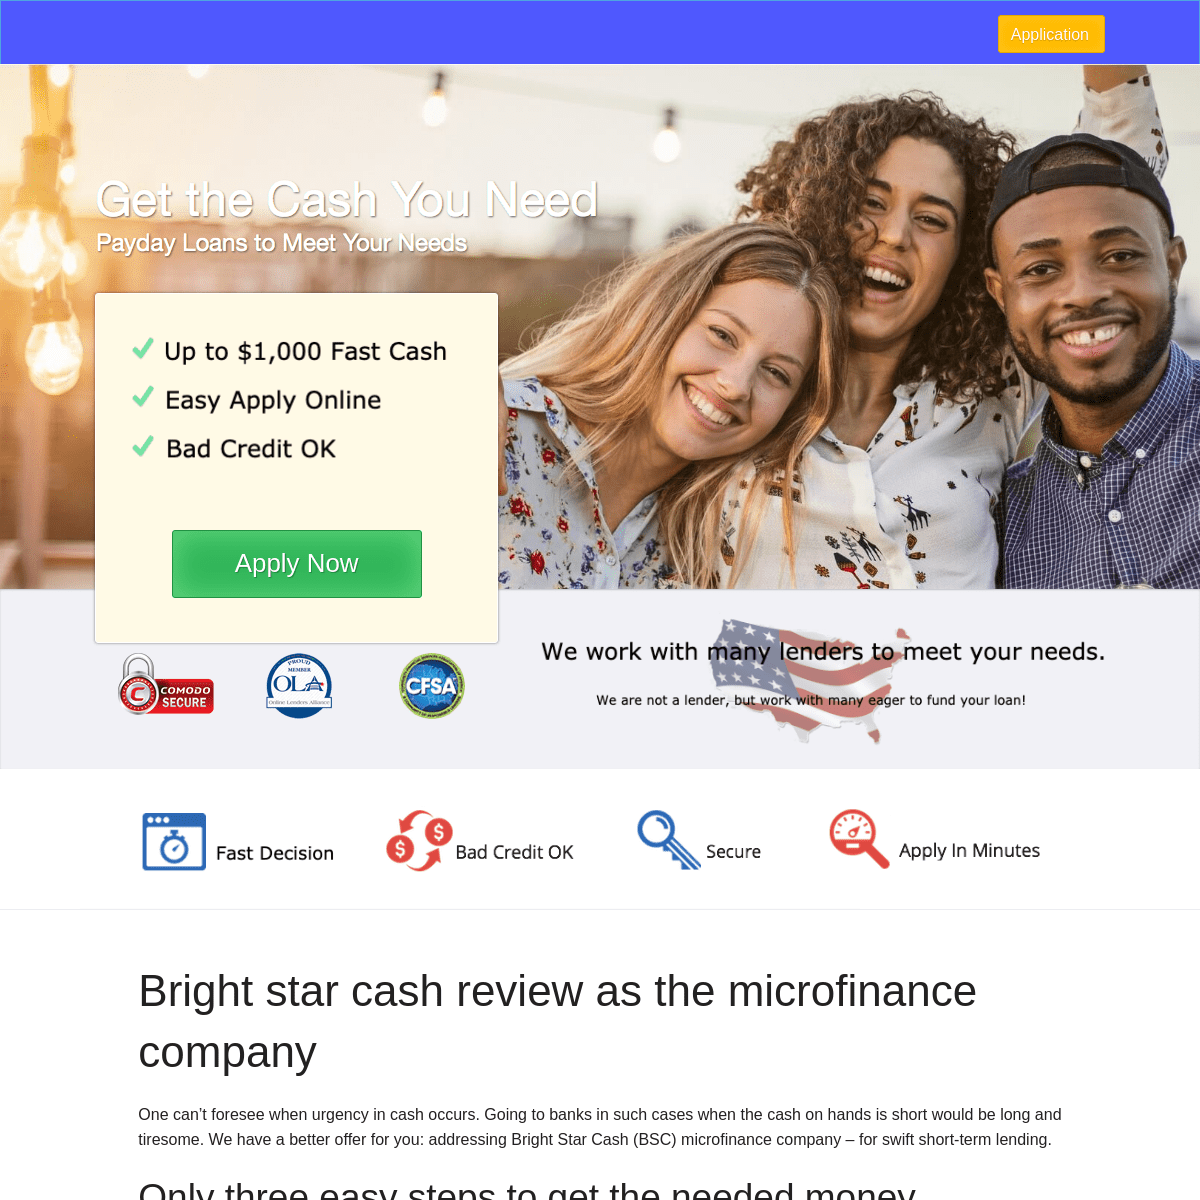 A complete backup of https://bright-star-payday.com